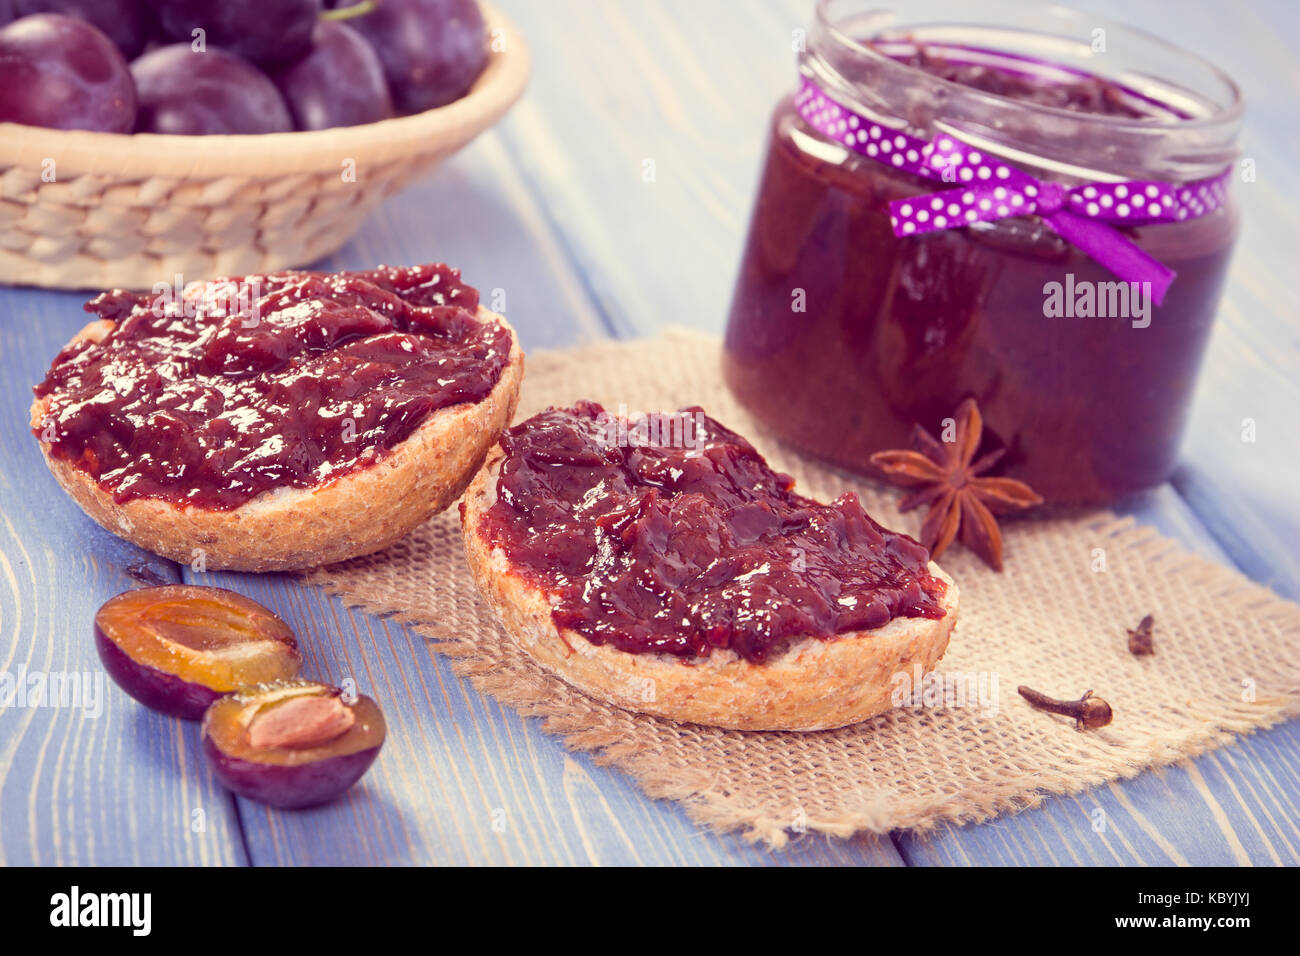 Vintage photo, Sandwiches with homemade plum marmalade or jam, concept of healthy sweet snack, breakfast or dessert Stock Photo